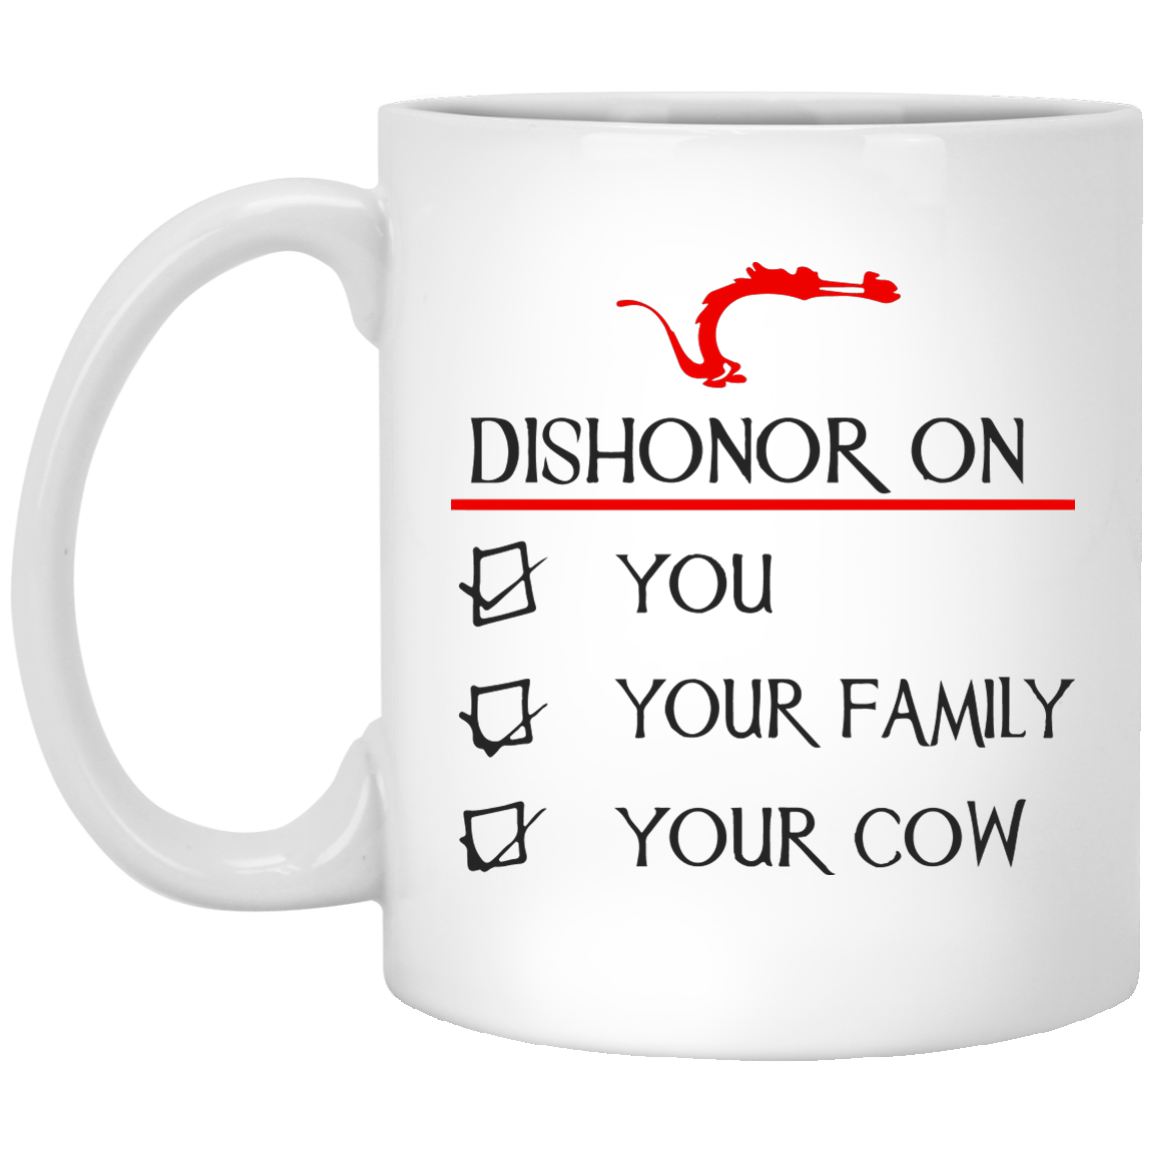 Dishonor on you your family your cow mugs